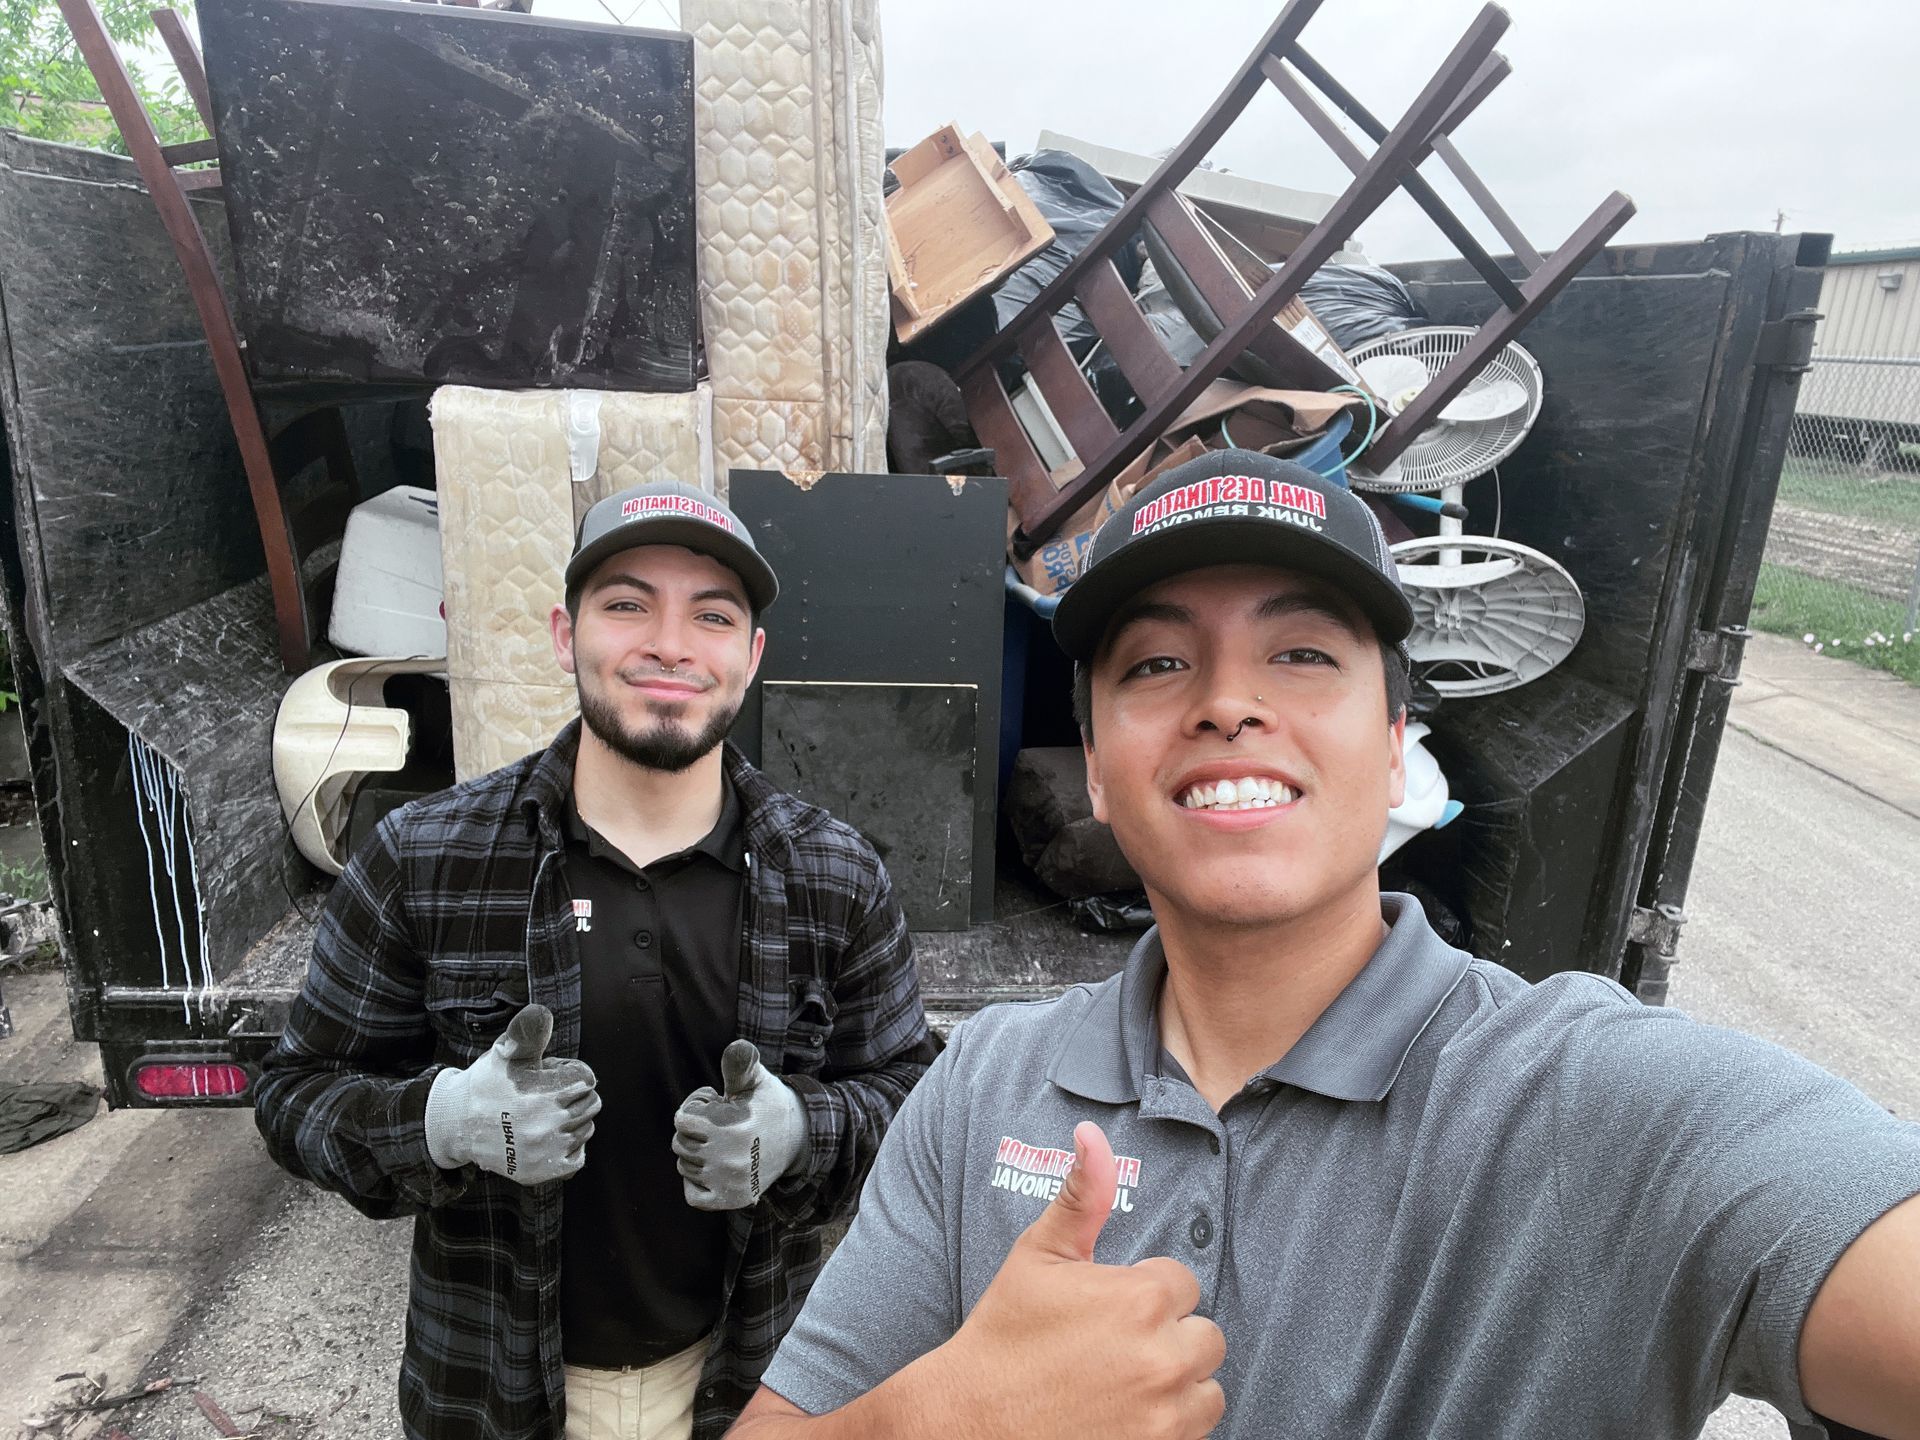 Looking to get rid of my junk in Alamo Ranch? Reach out to your local junk hauling specialists - Final Destination. Our junk removal experts can remove your junk items with same-day service. What kind of junk do we haul in Alamo Ranch? We take appliances, furniture, remodeling debris, brush and more. Receive a free estimate today!